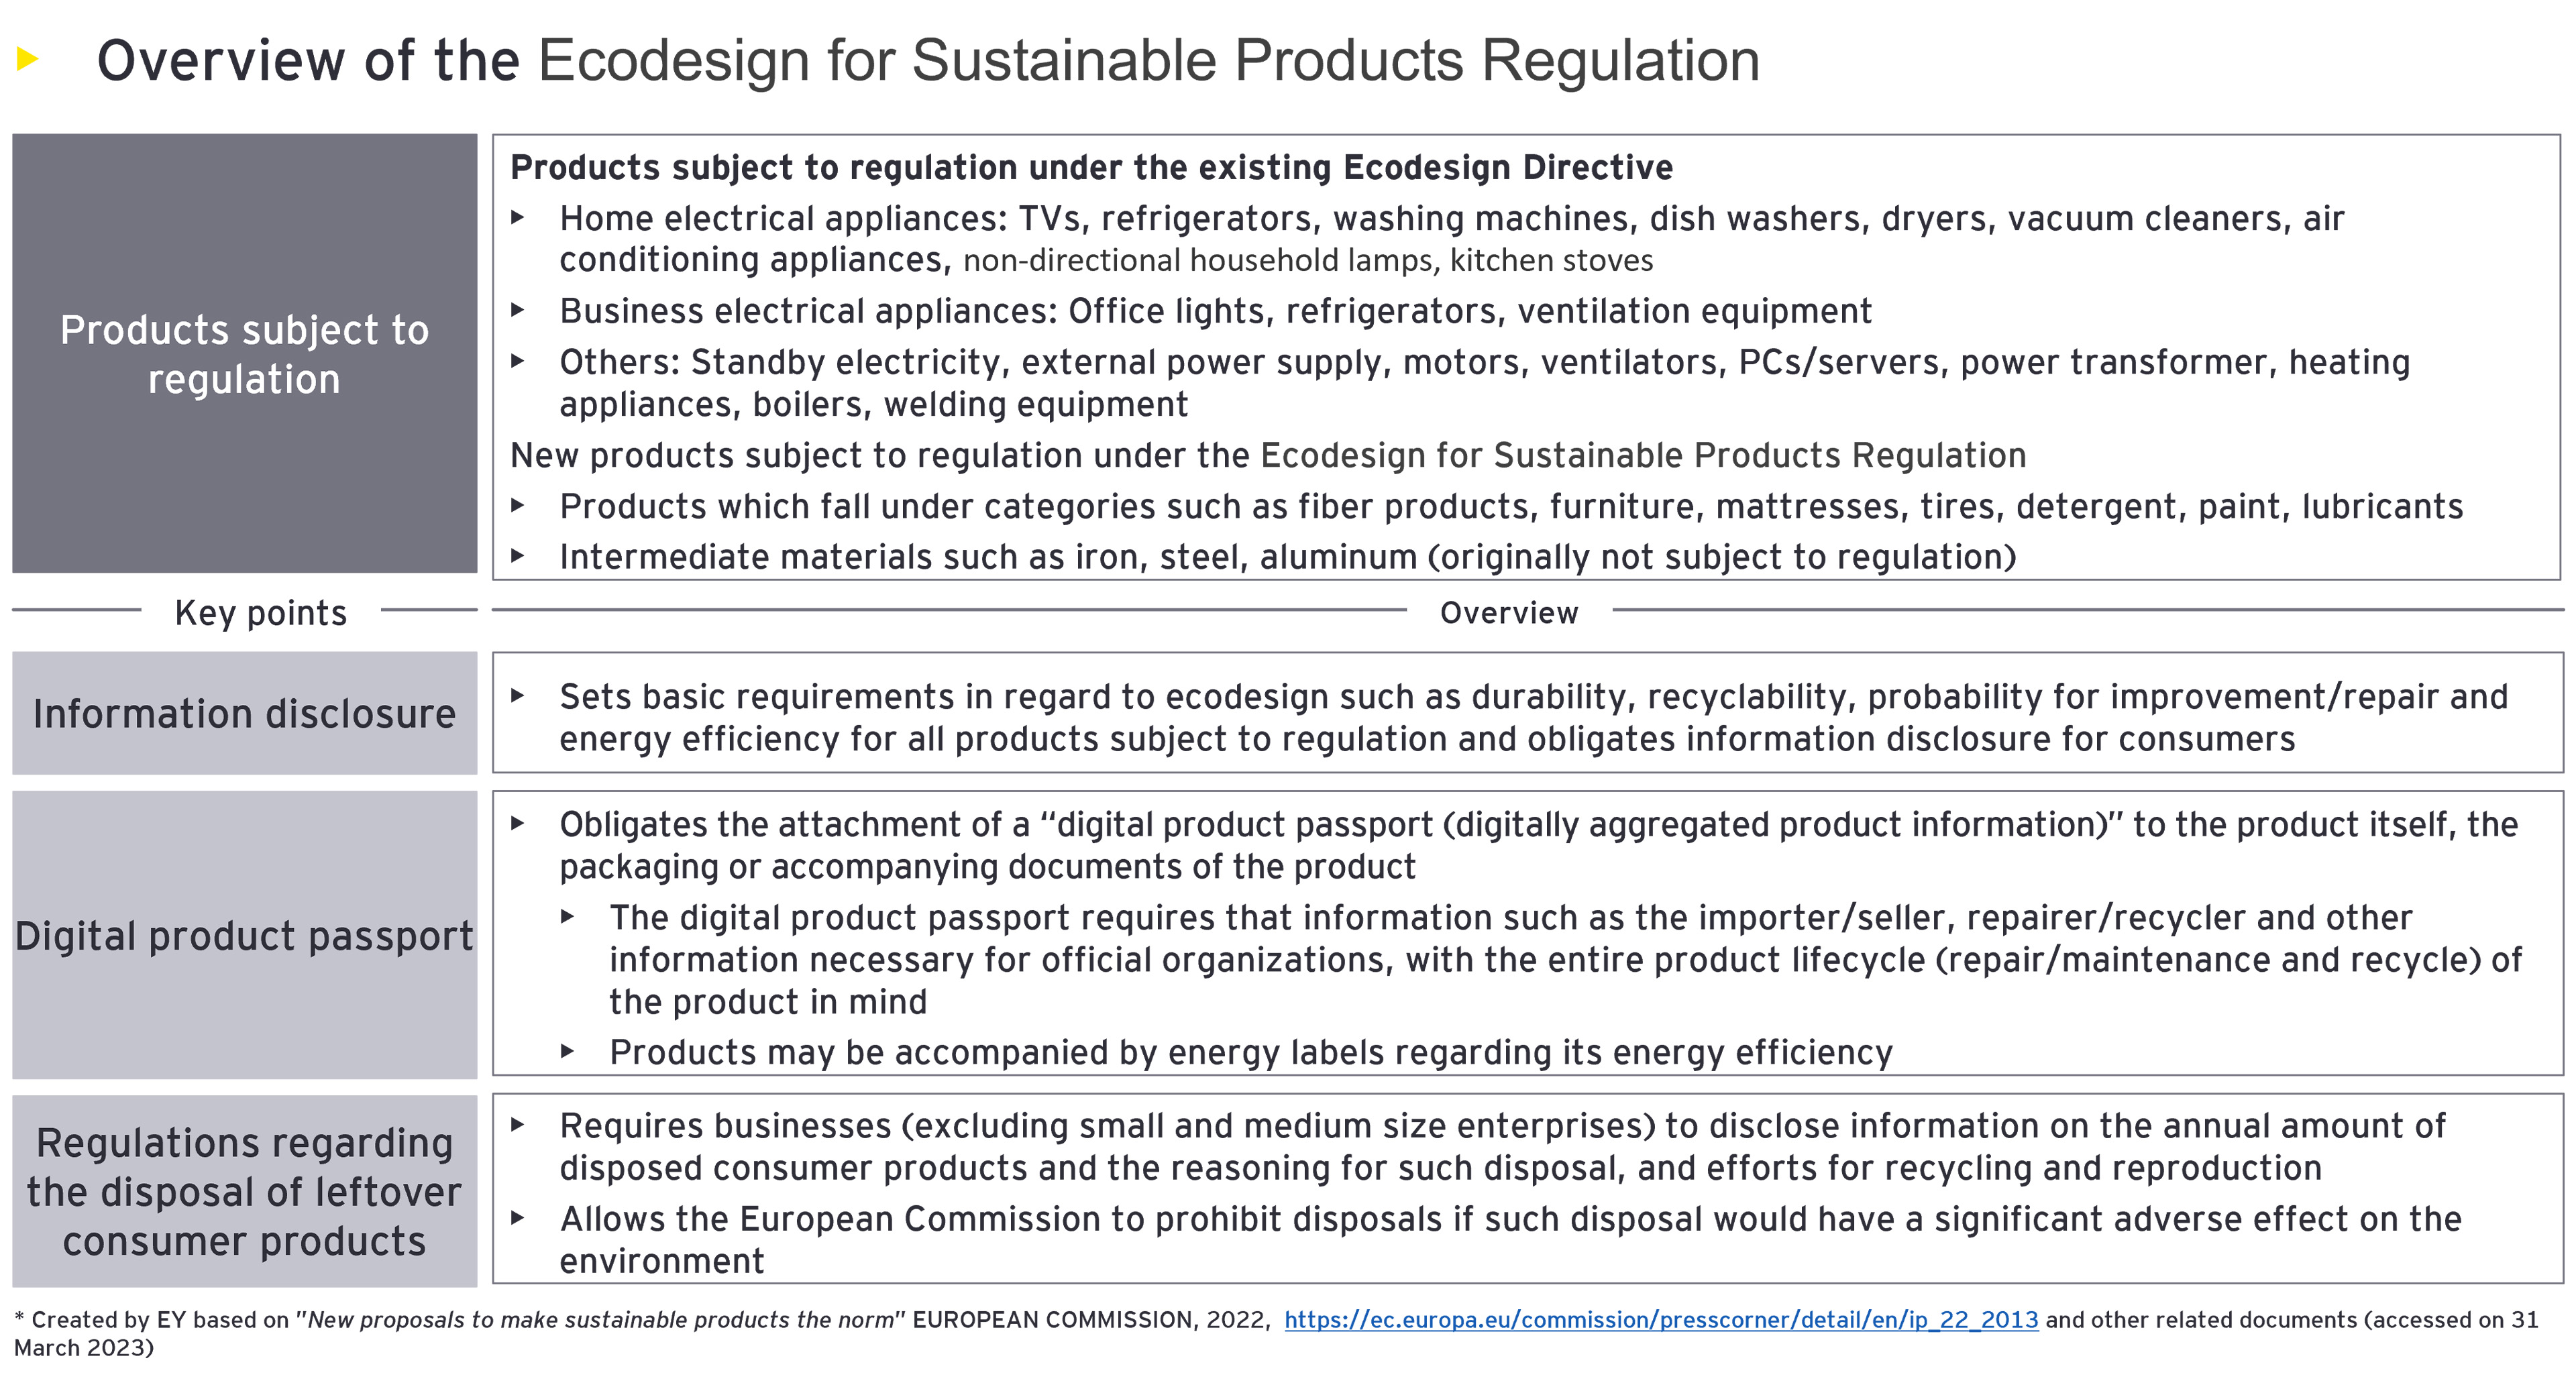 Figure7: Overview of the Ecodesign for Sustainable Products Regulation